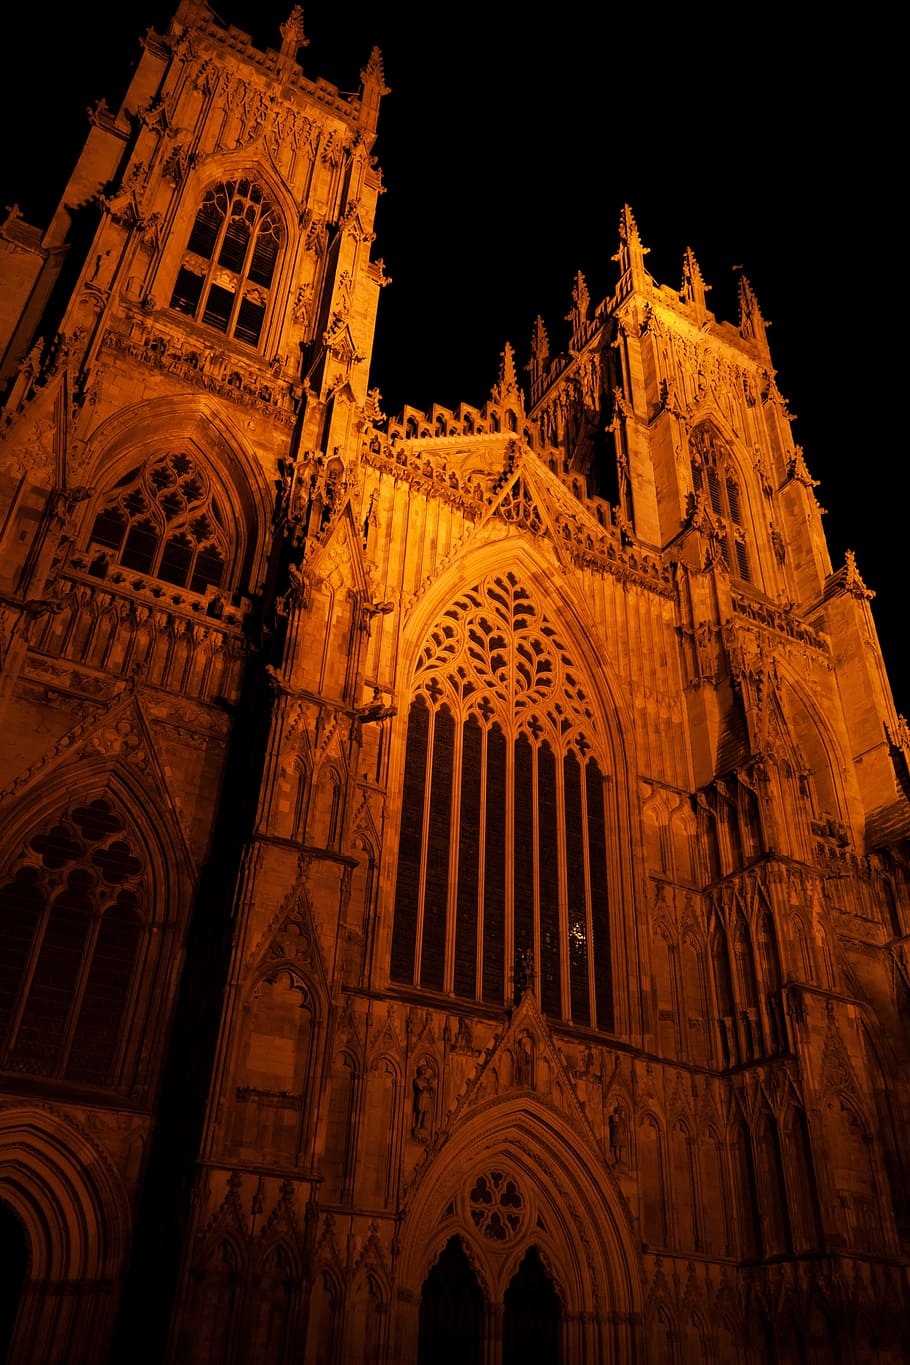 architecture, night, building, cathedral, dark, church, england, illuminated, gothic, historical